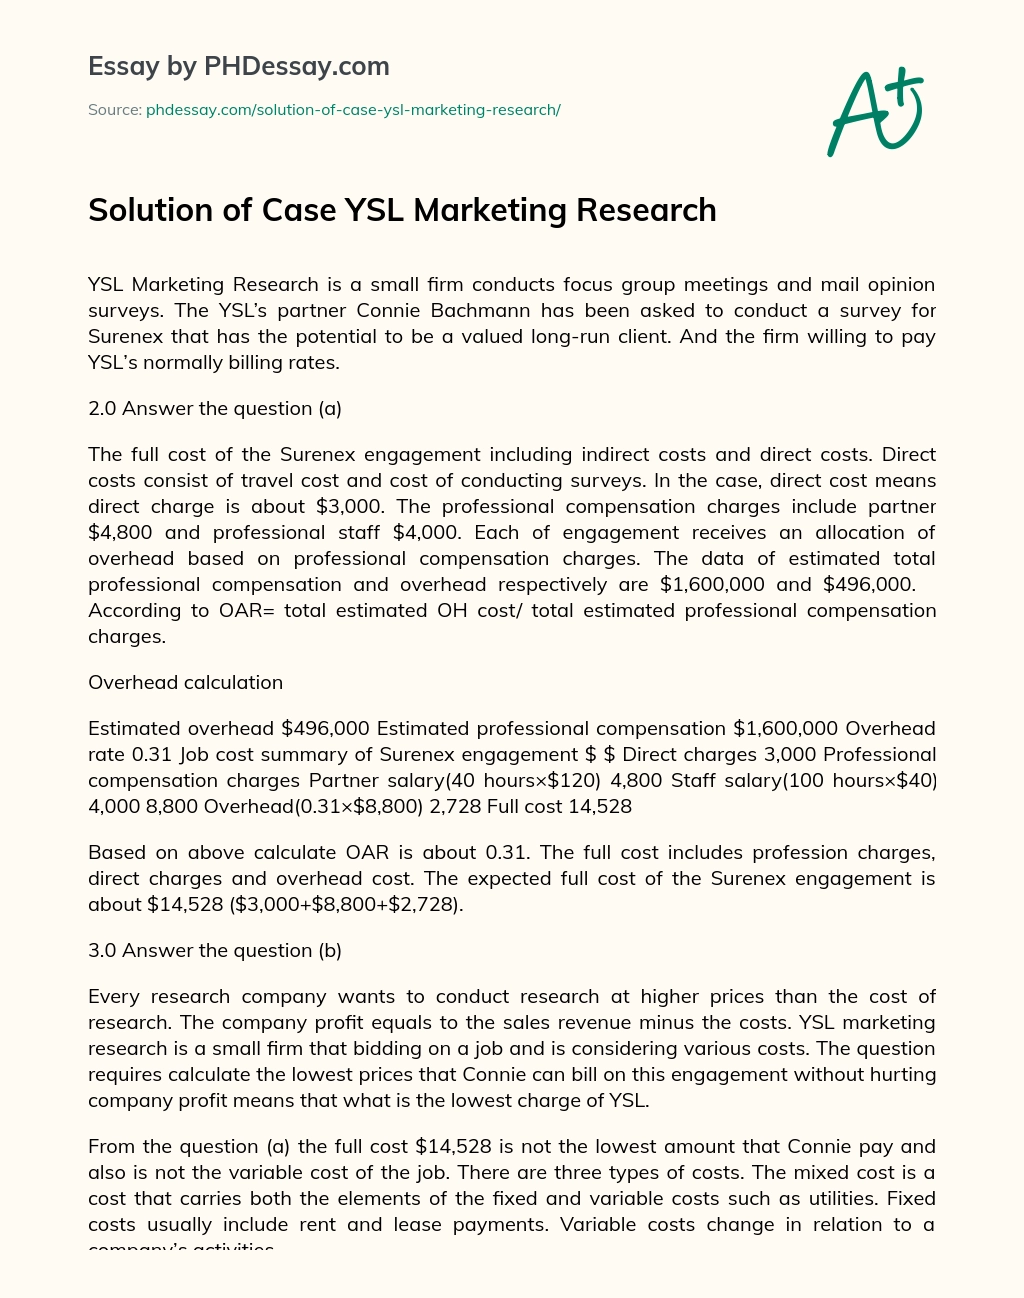 Solution of Case YSL Marketing Research essay